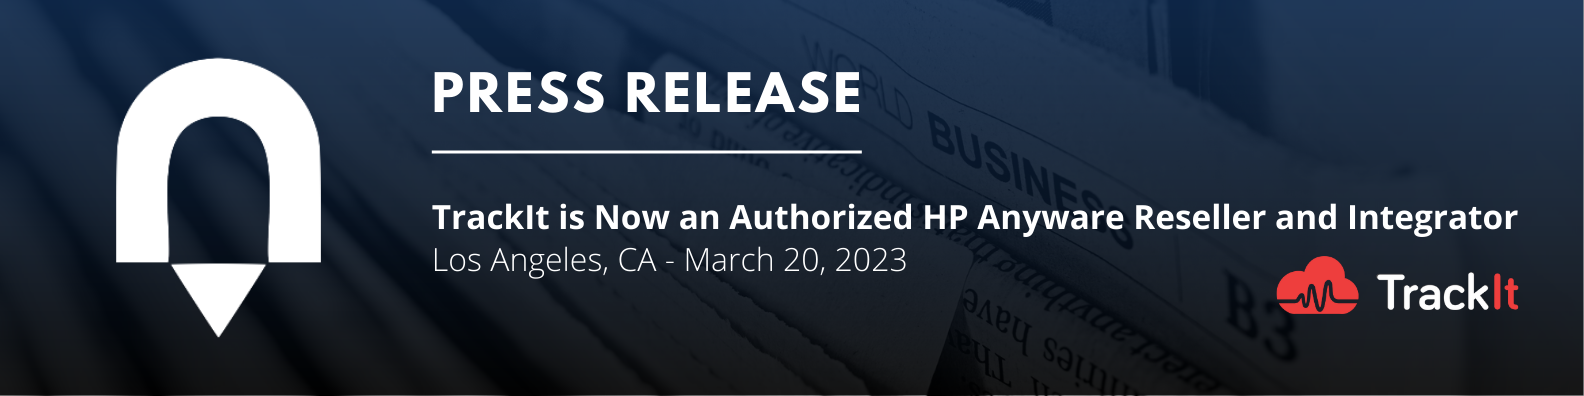 hp anyware press release image